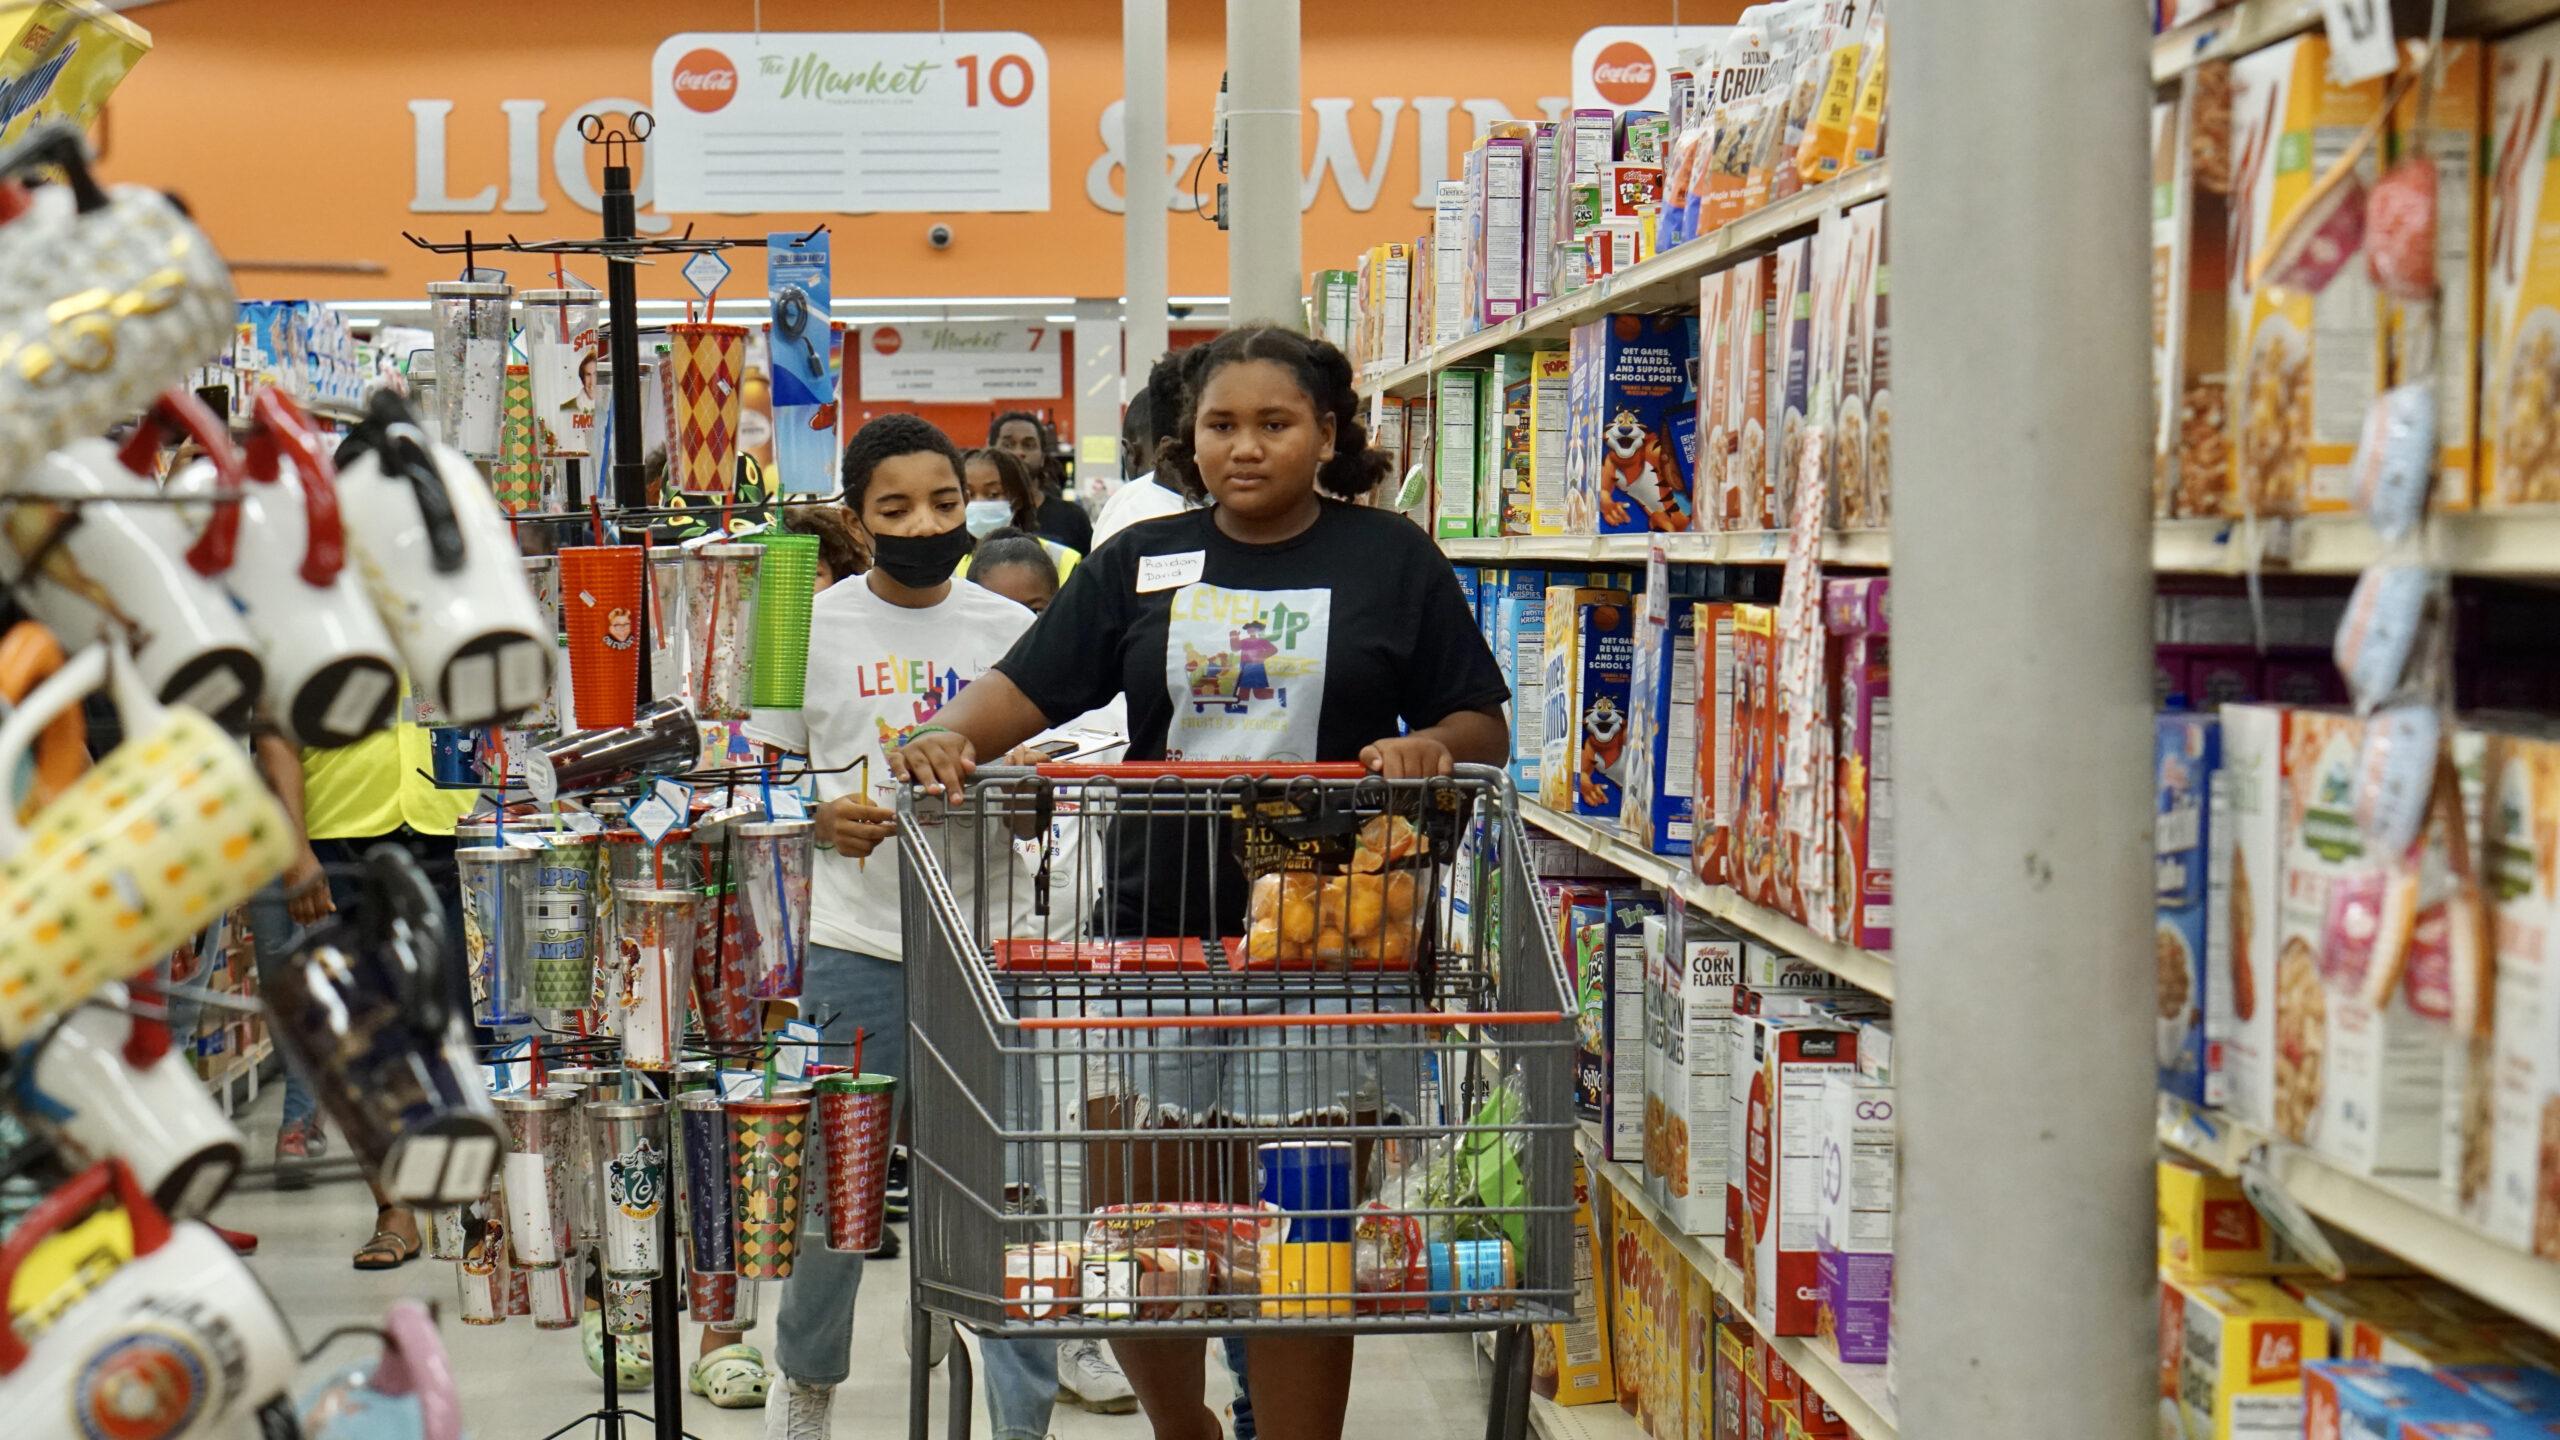 Preteens race through the Market STX for a chance to win cash prizes in a reinvented "Supermarket Sweep" hosted by Cane Bay Cares.